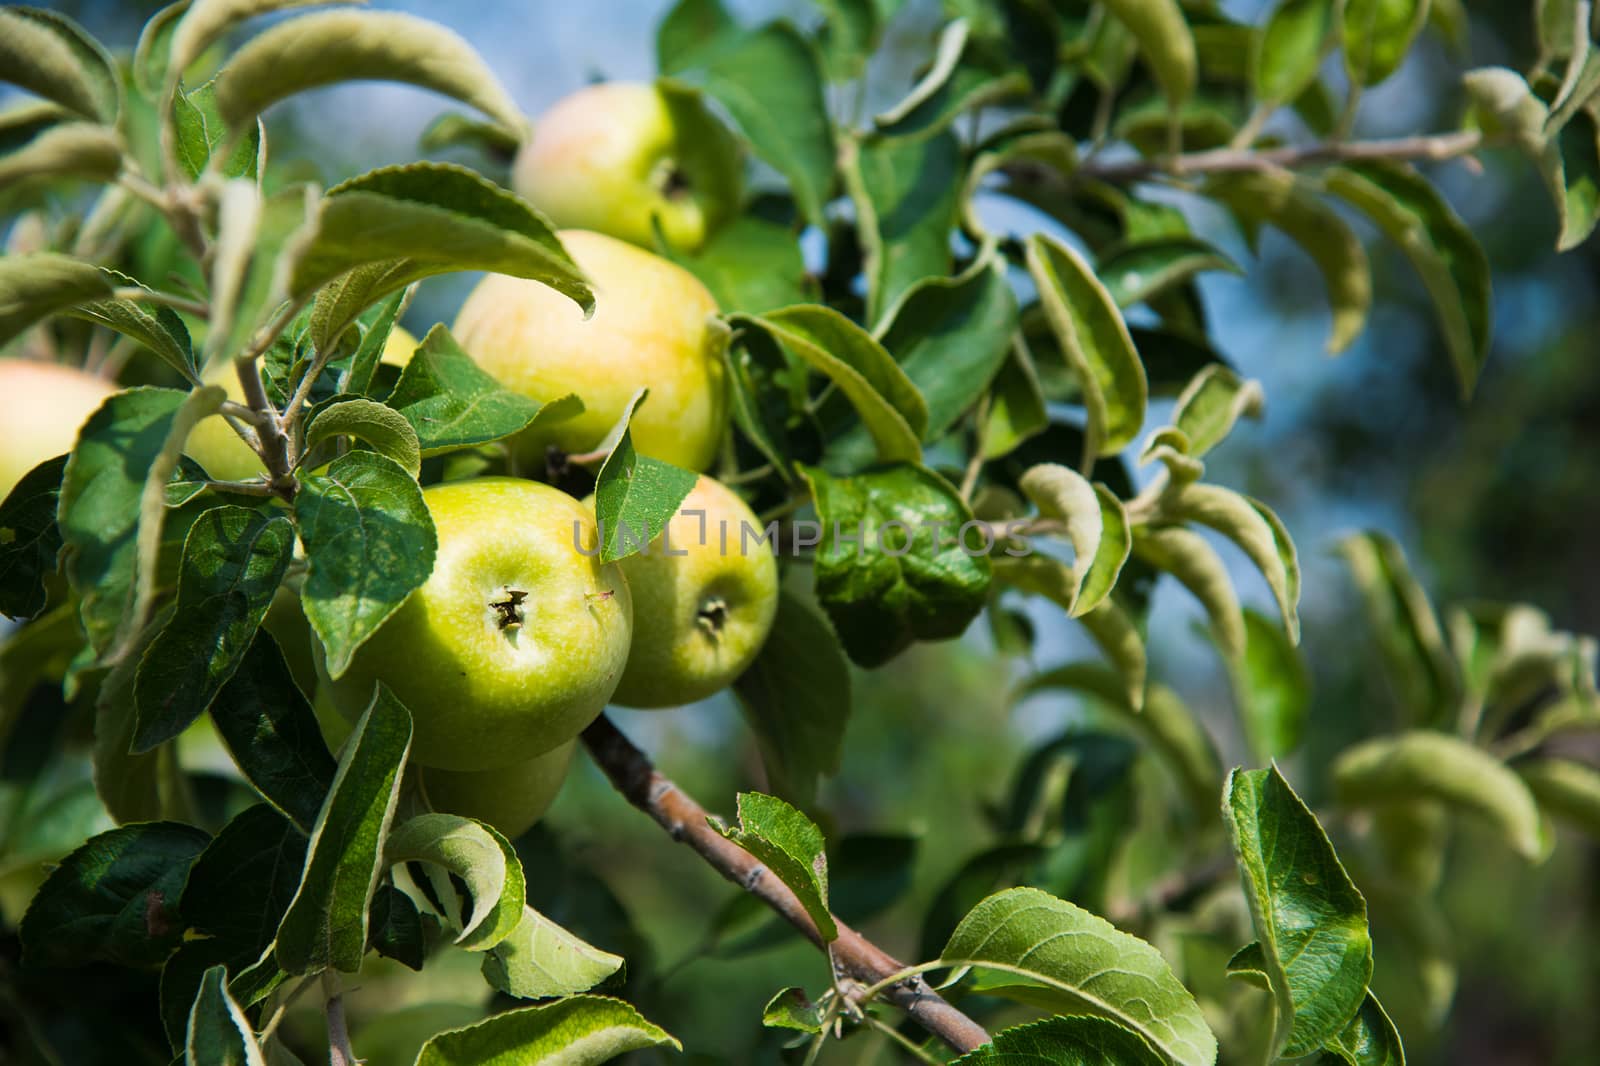 Apples grows on a branch among the green foliage by grigorenko